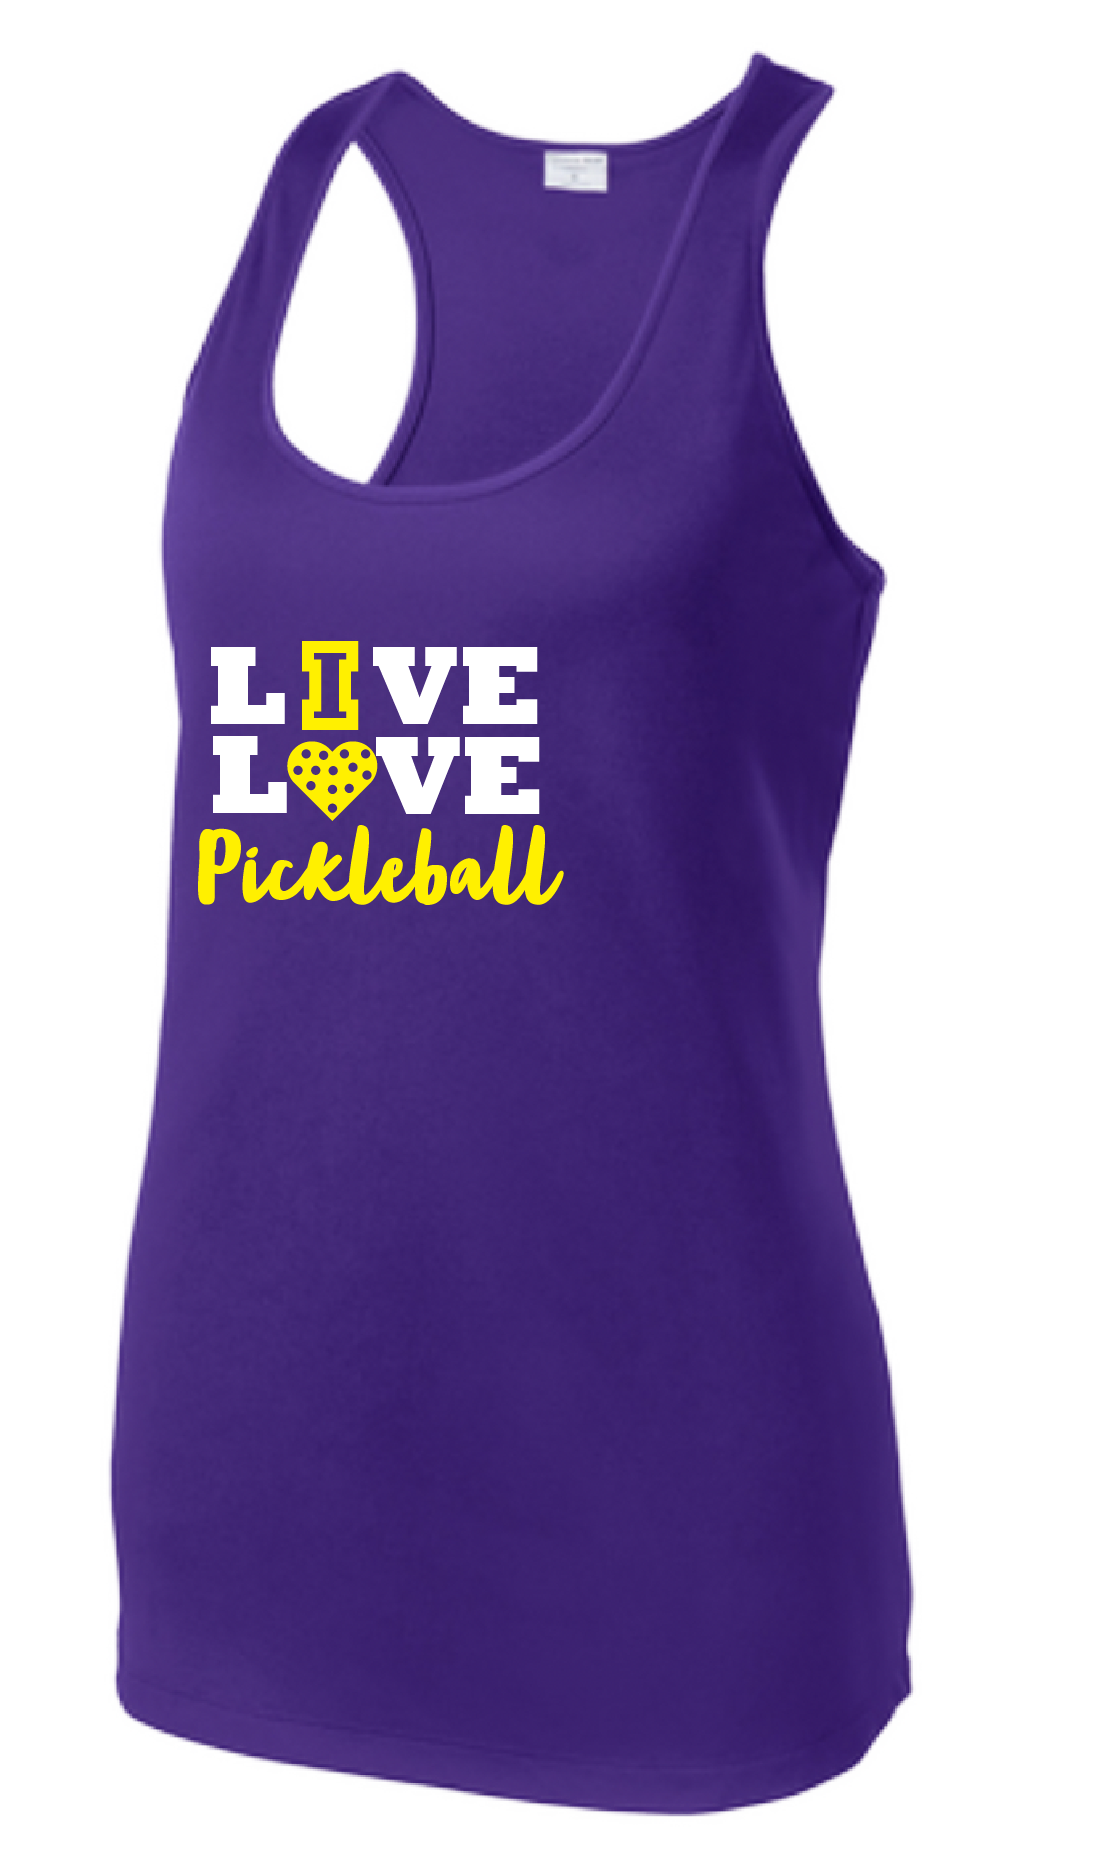 Pickleball Design: Live Love Pickleball  Women's Styles: Racerback Tank  Turn up the volume in this Women's shirt with its perfect mix of softness and attitude. Material is ultra-comfortable with moisture wicking properties and tri-blend softness. PosiCharge technology locks in color. Highly breathable and lightweight.